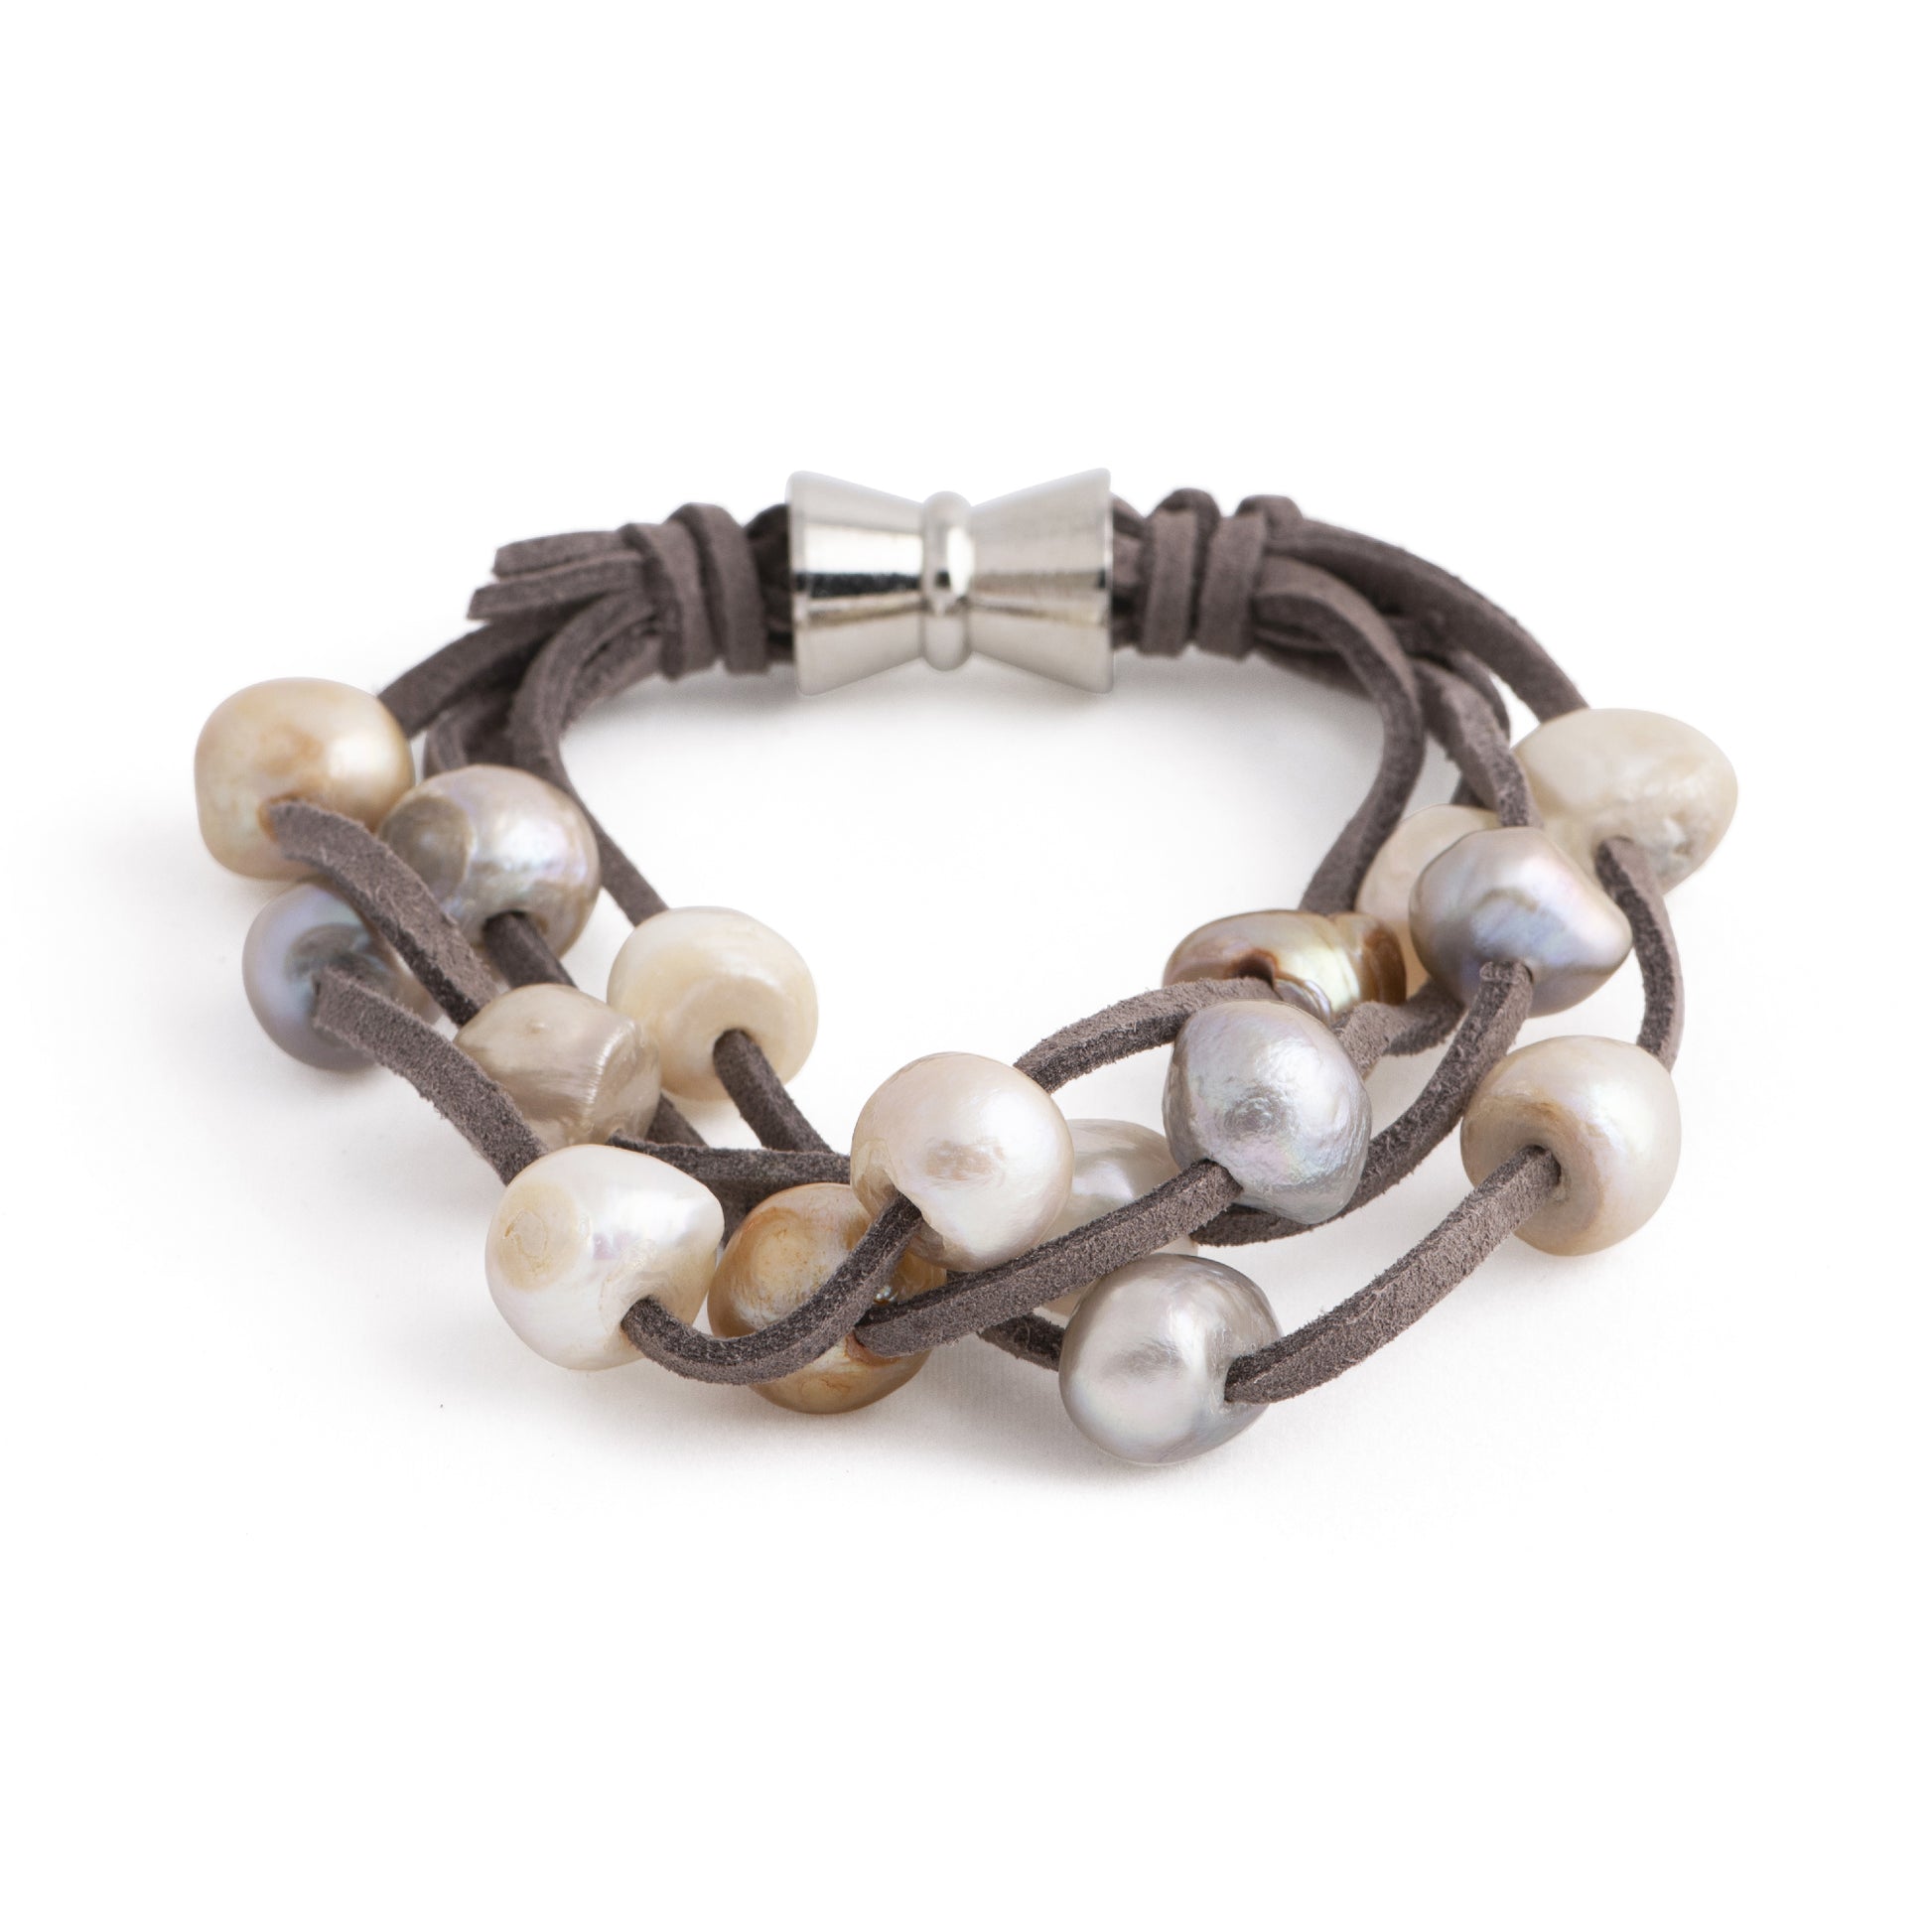 Bengal - Suede multi-layer bracelet with freshwater pearls and magnetic clasp (Dark grey suede, multicolor pearls)